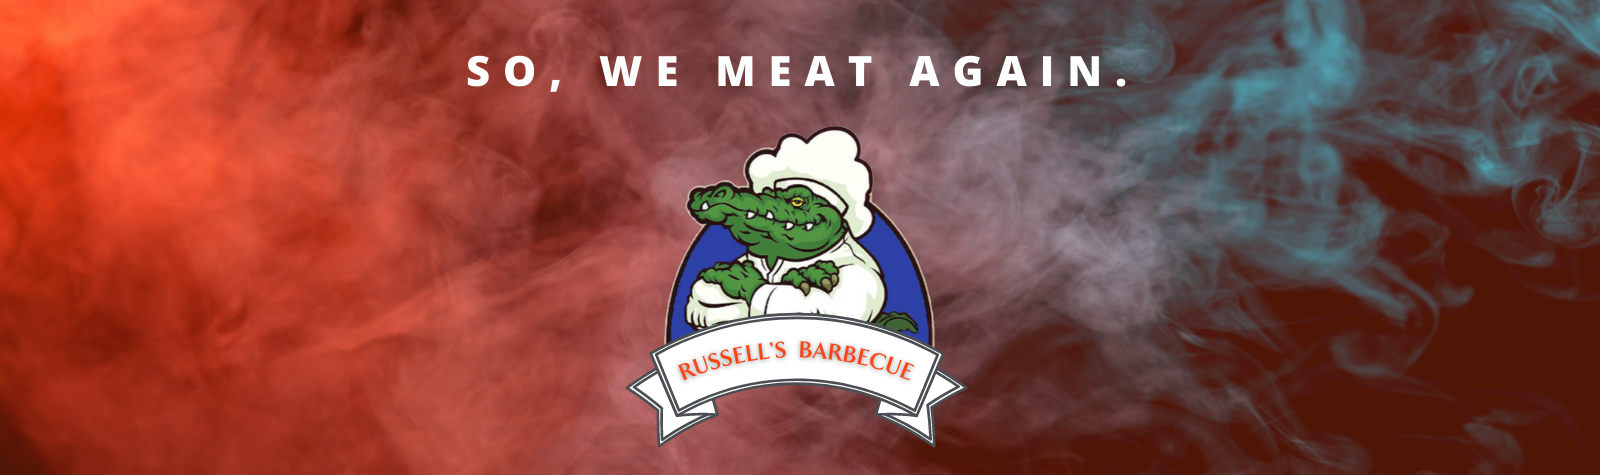 35 Stories for 35 Years: Story #31 – So, We Meat Again: The History of Russell’s Barbecue